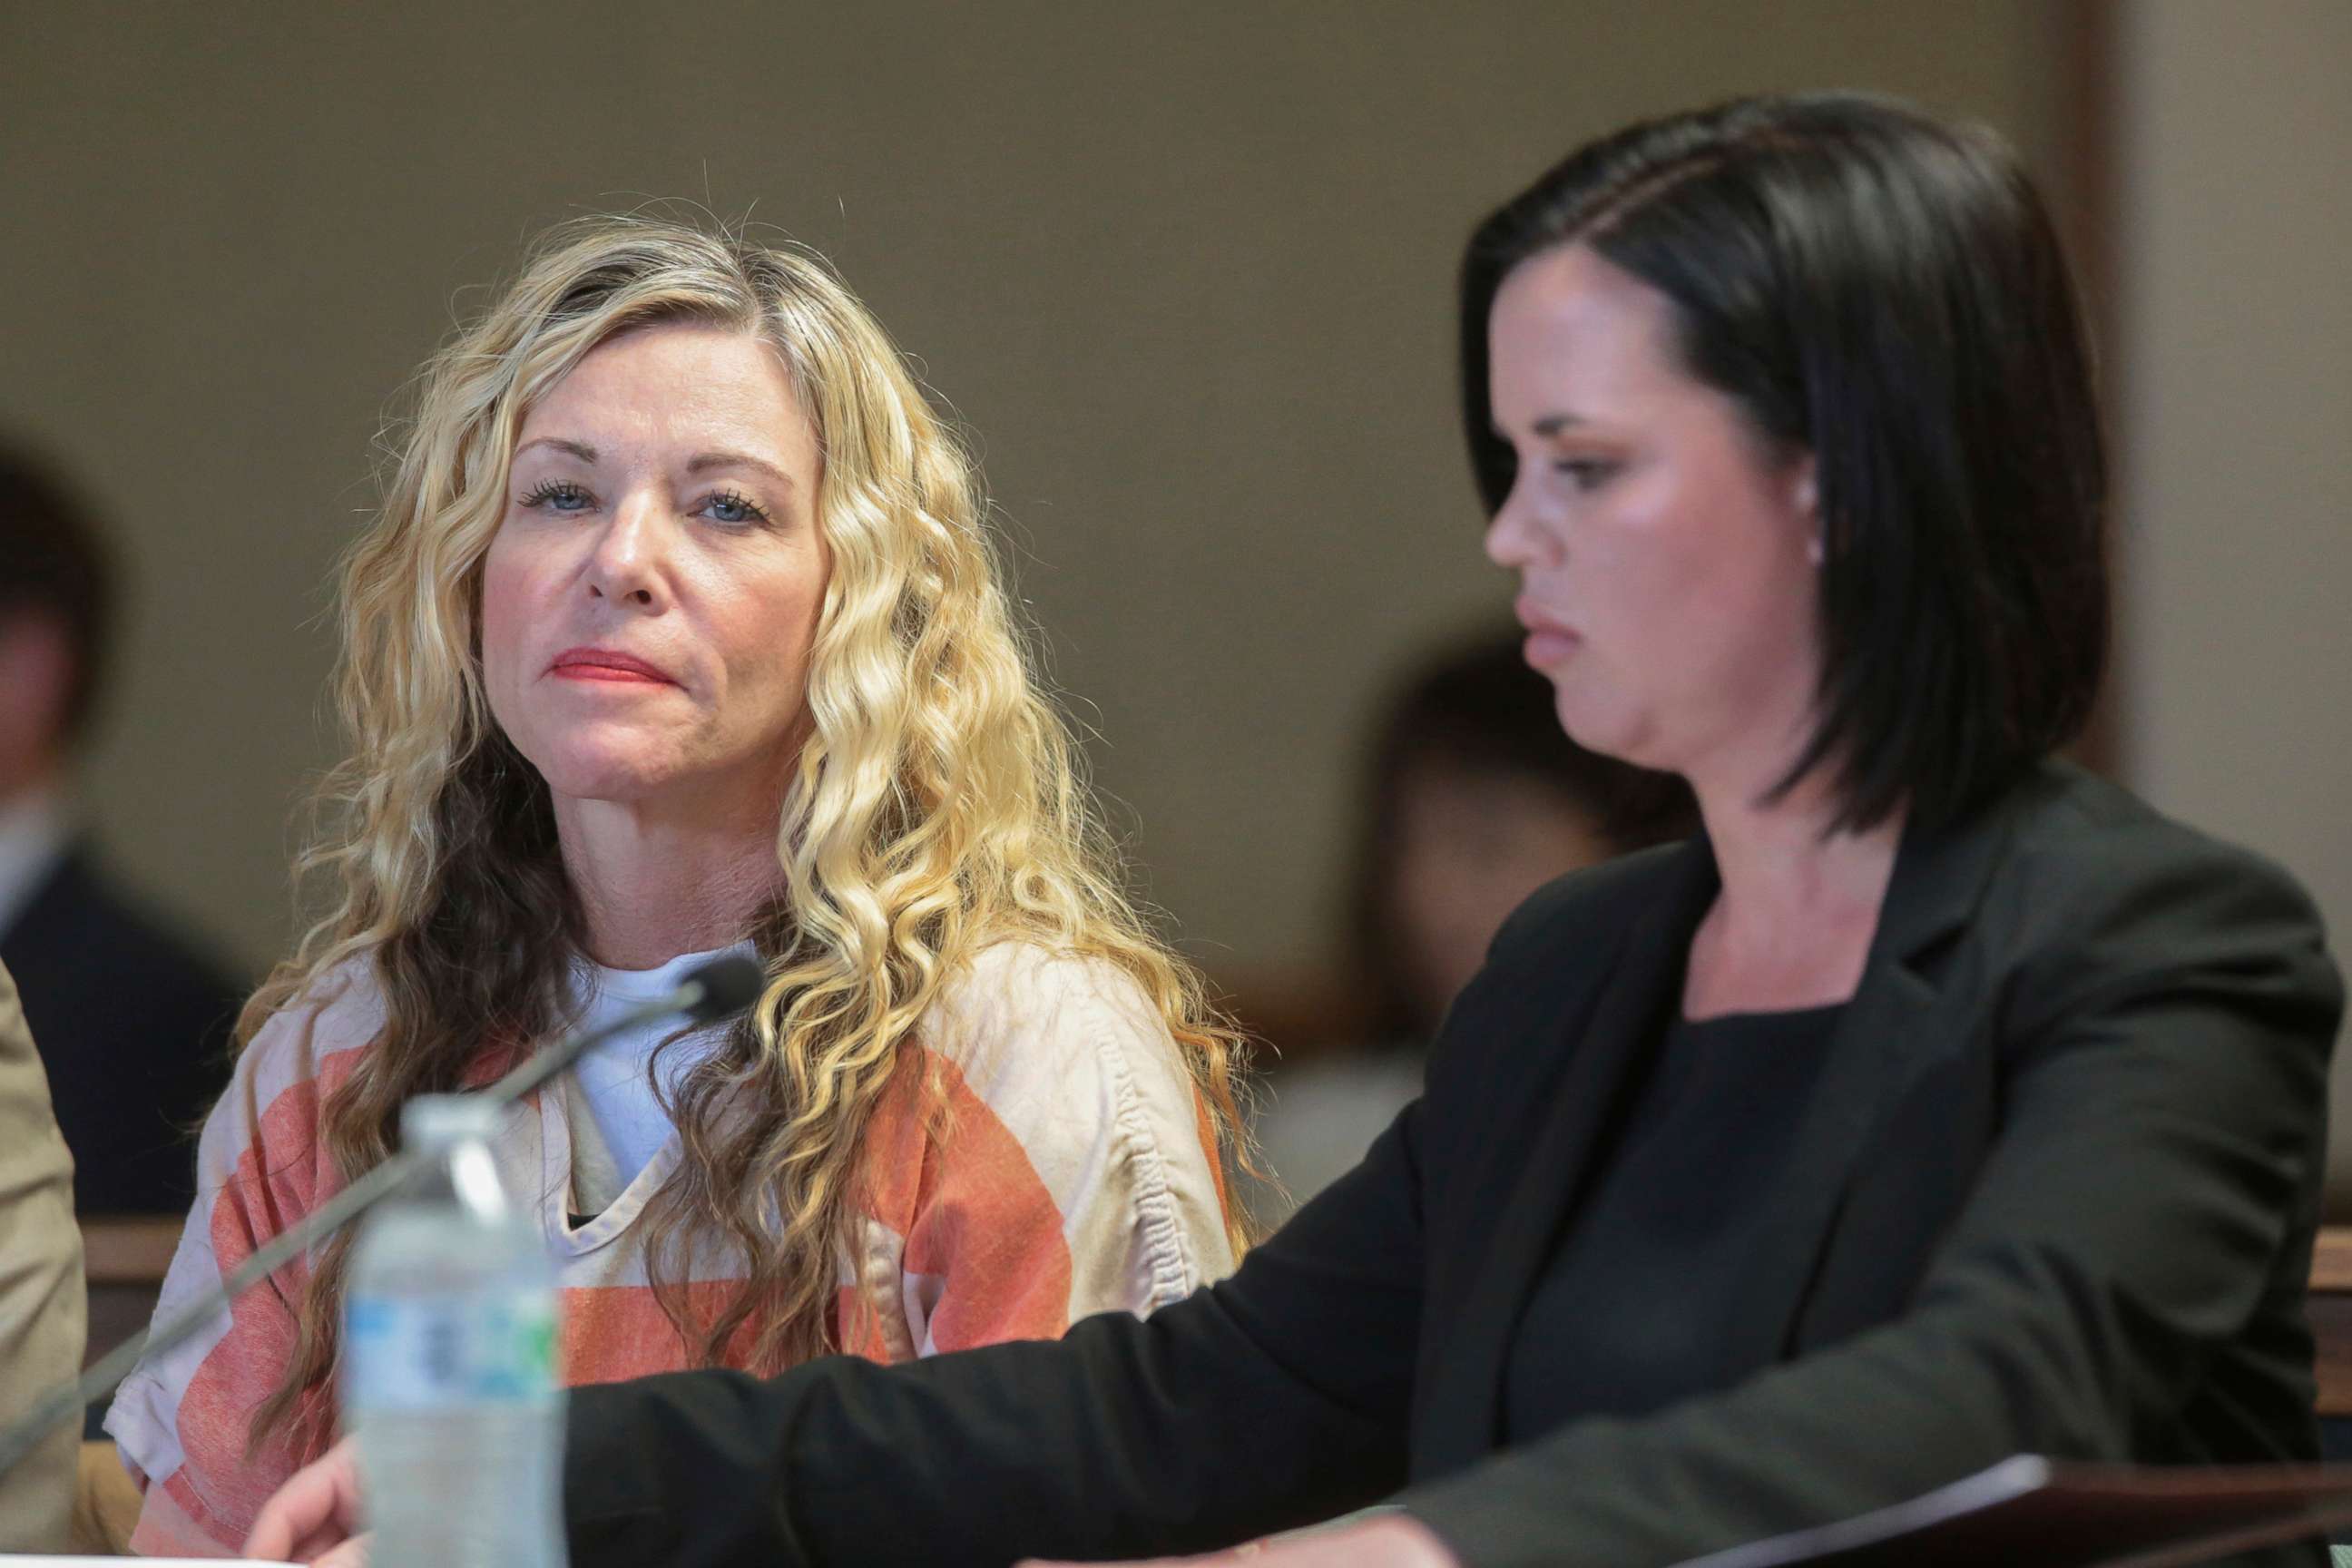 PHOTO: Lori Vallow Daybell glances at the camera during her hearing, March 6, 2020, with her defense attorney, Edwina Elcox, right, in Rexburg, Idaho.